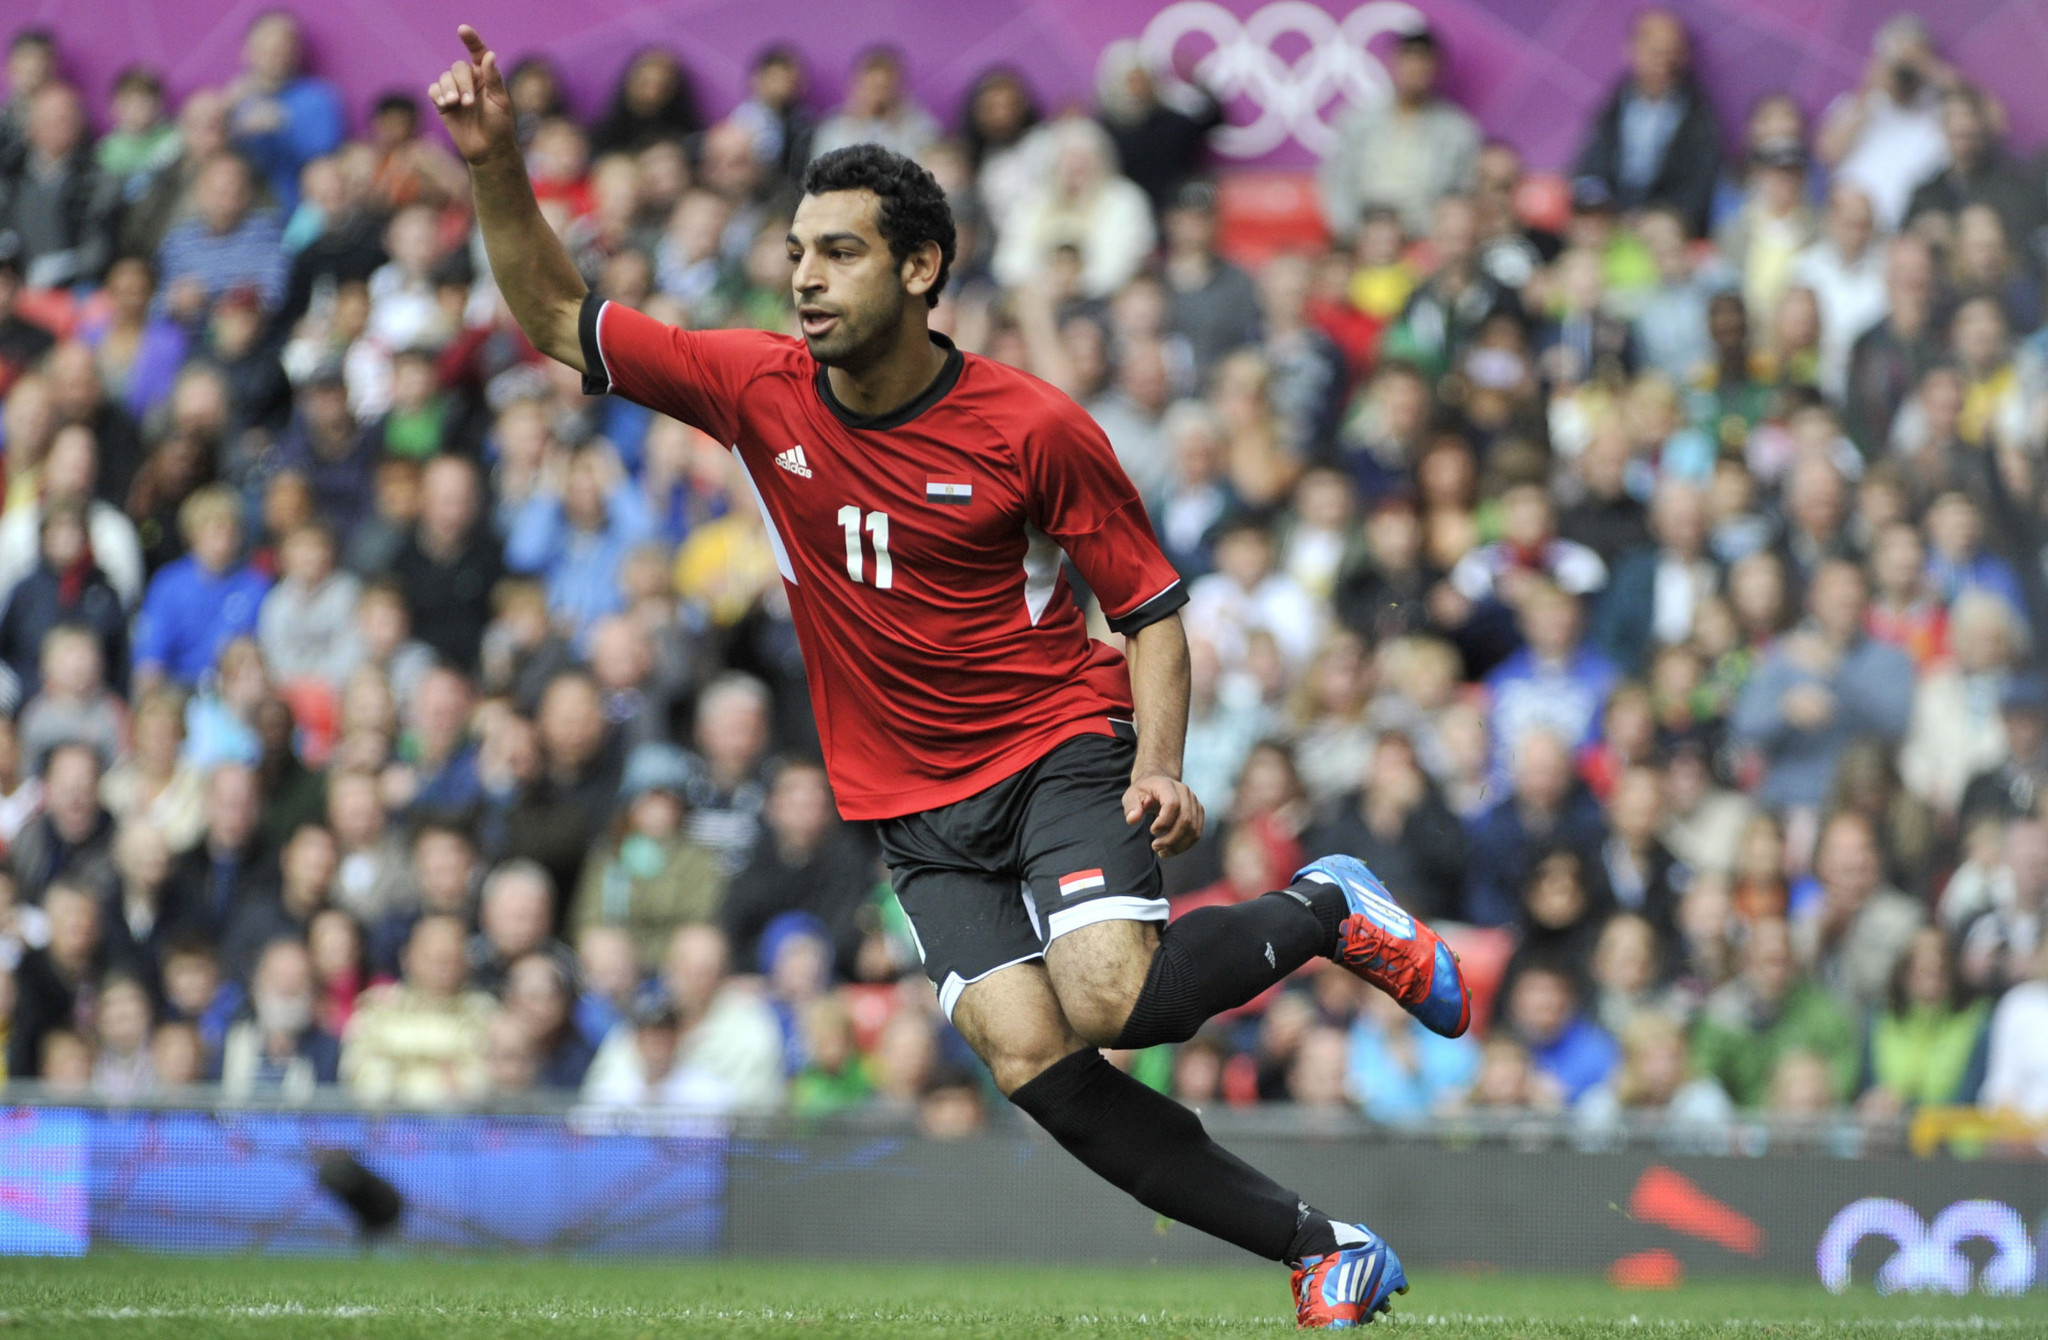 Mohamed Salah scored three goals for Egypt during the London 2012 Olympic Games ©Getty Images